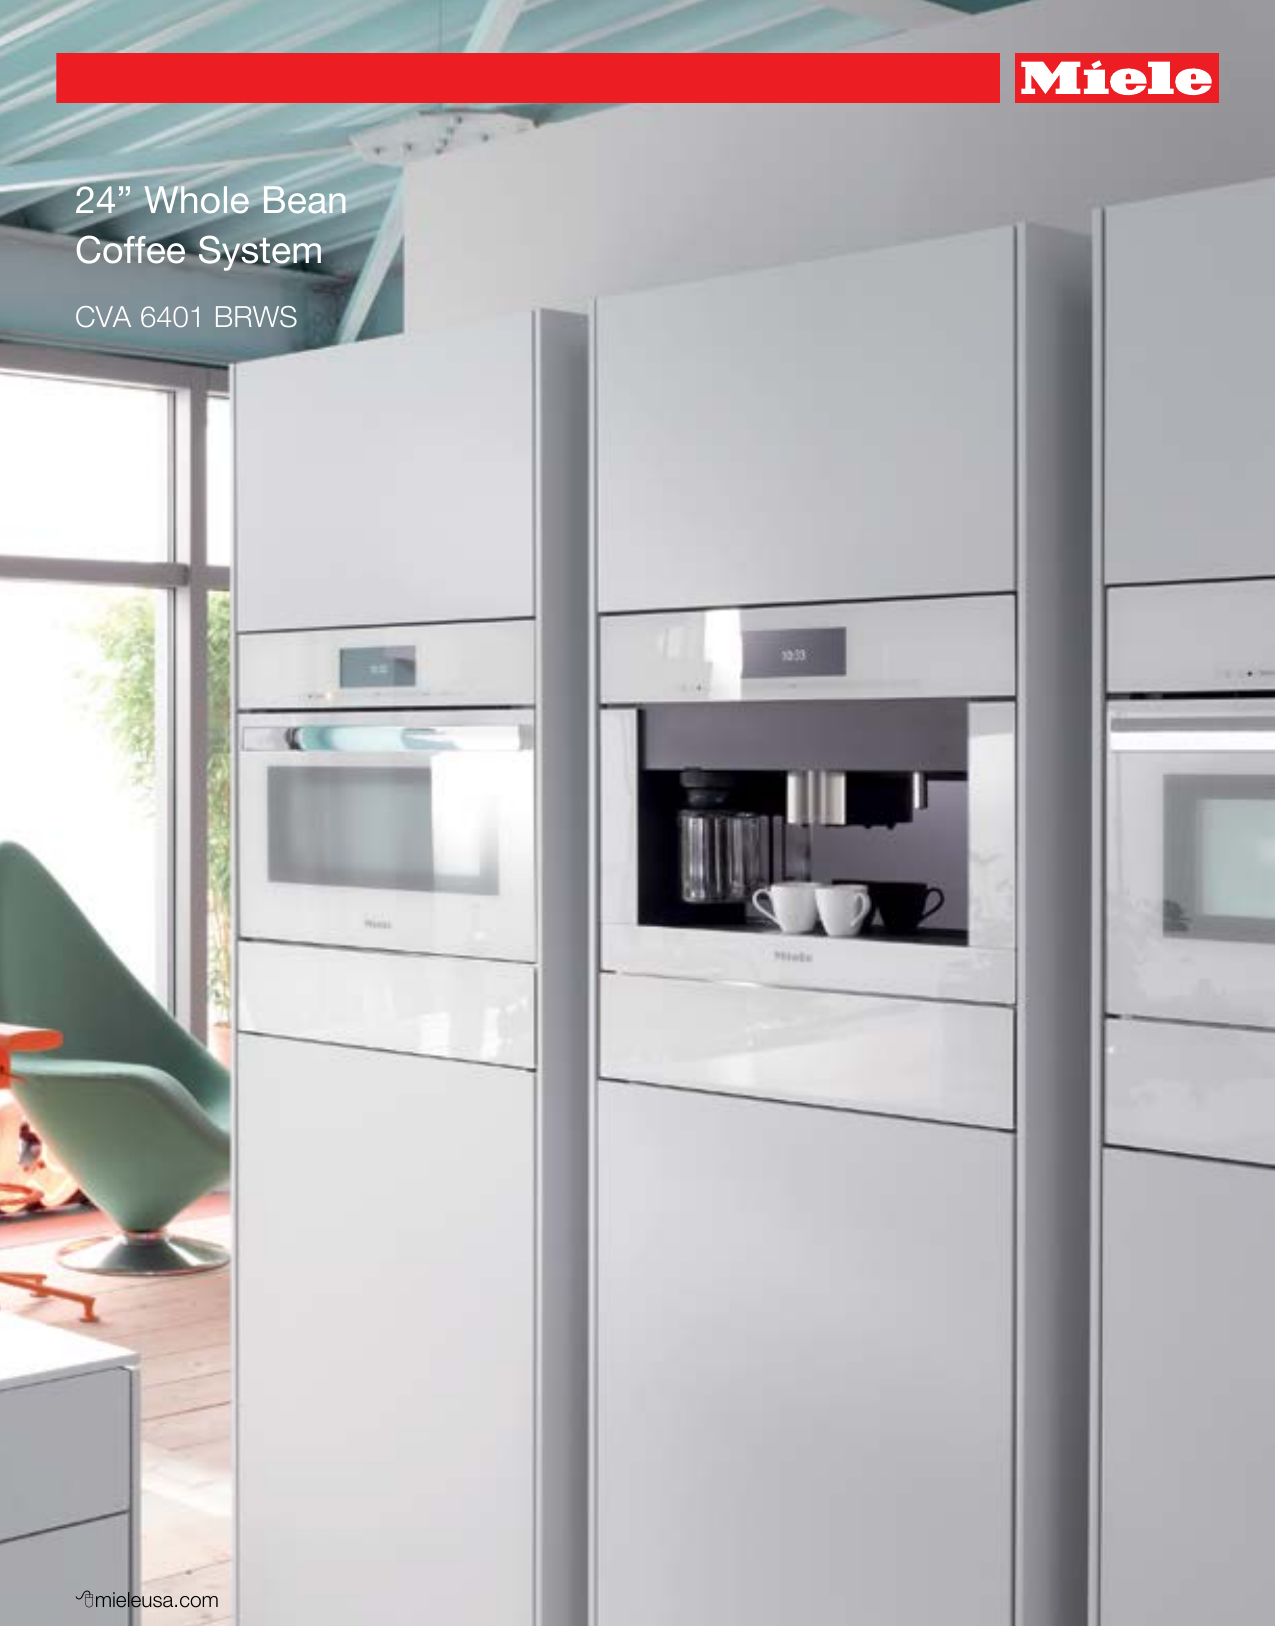 Page 1 of 7 - Miele Miele-Cva-6401-Built-In-Specification-Sheet-  Miele-cva-6401-built-in-specification-sheet